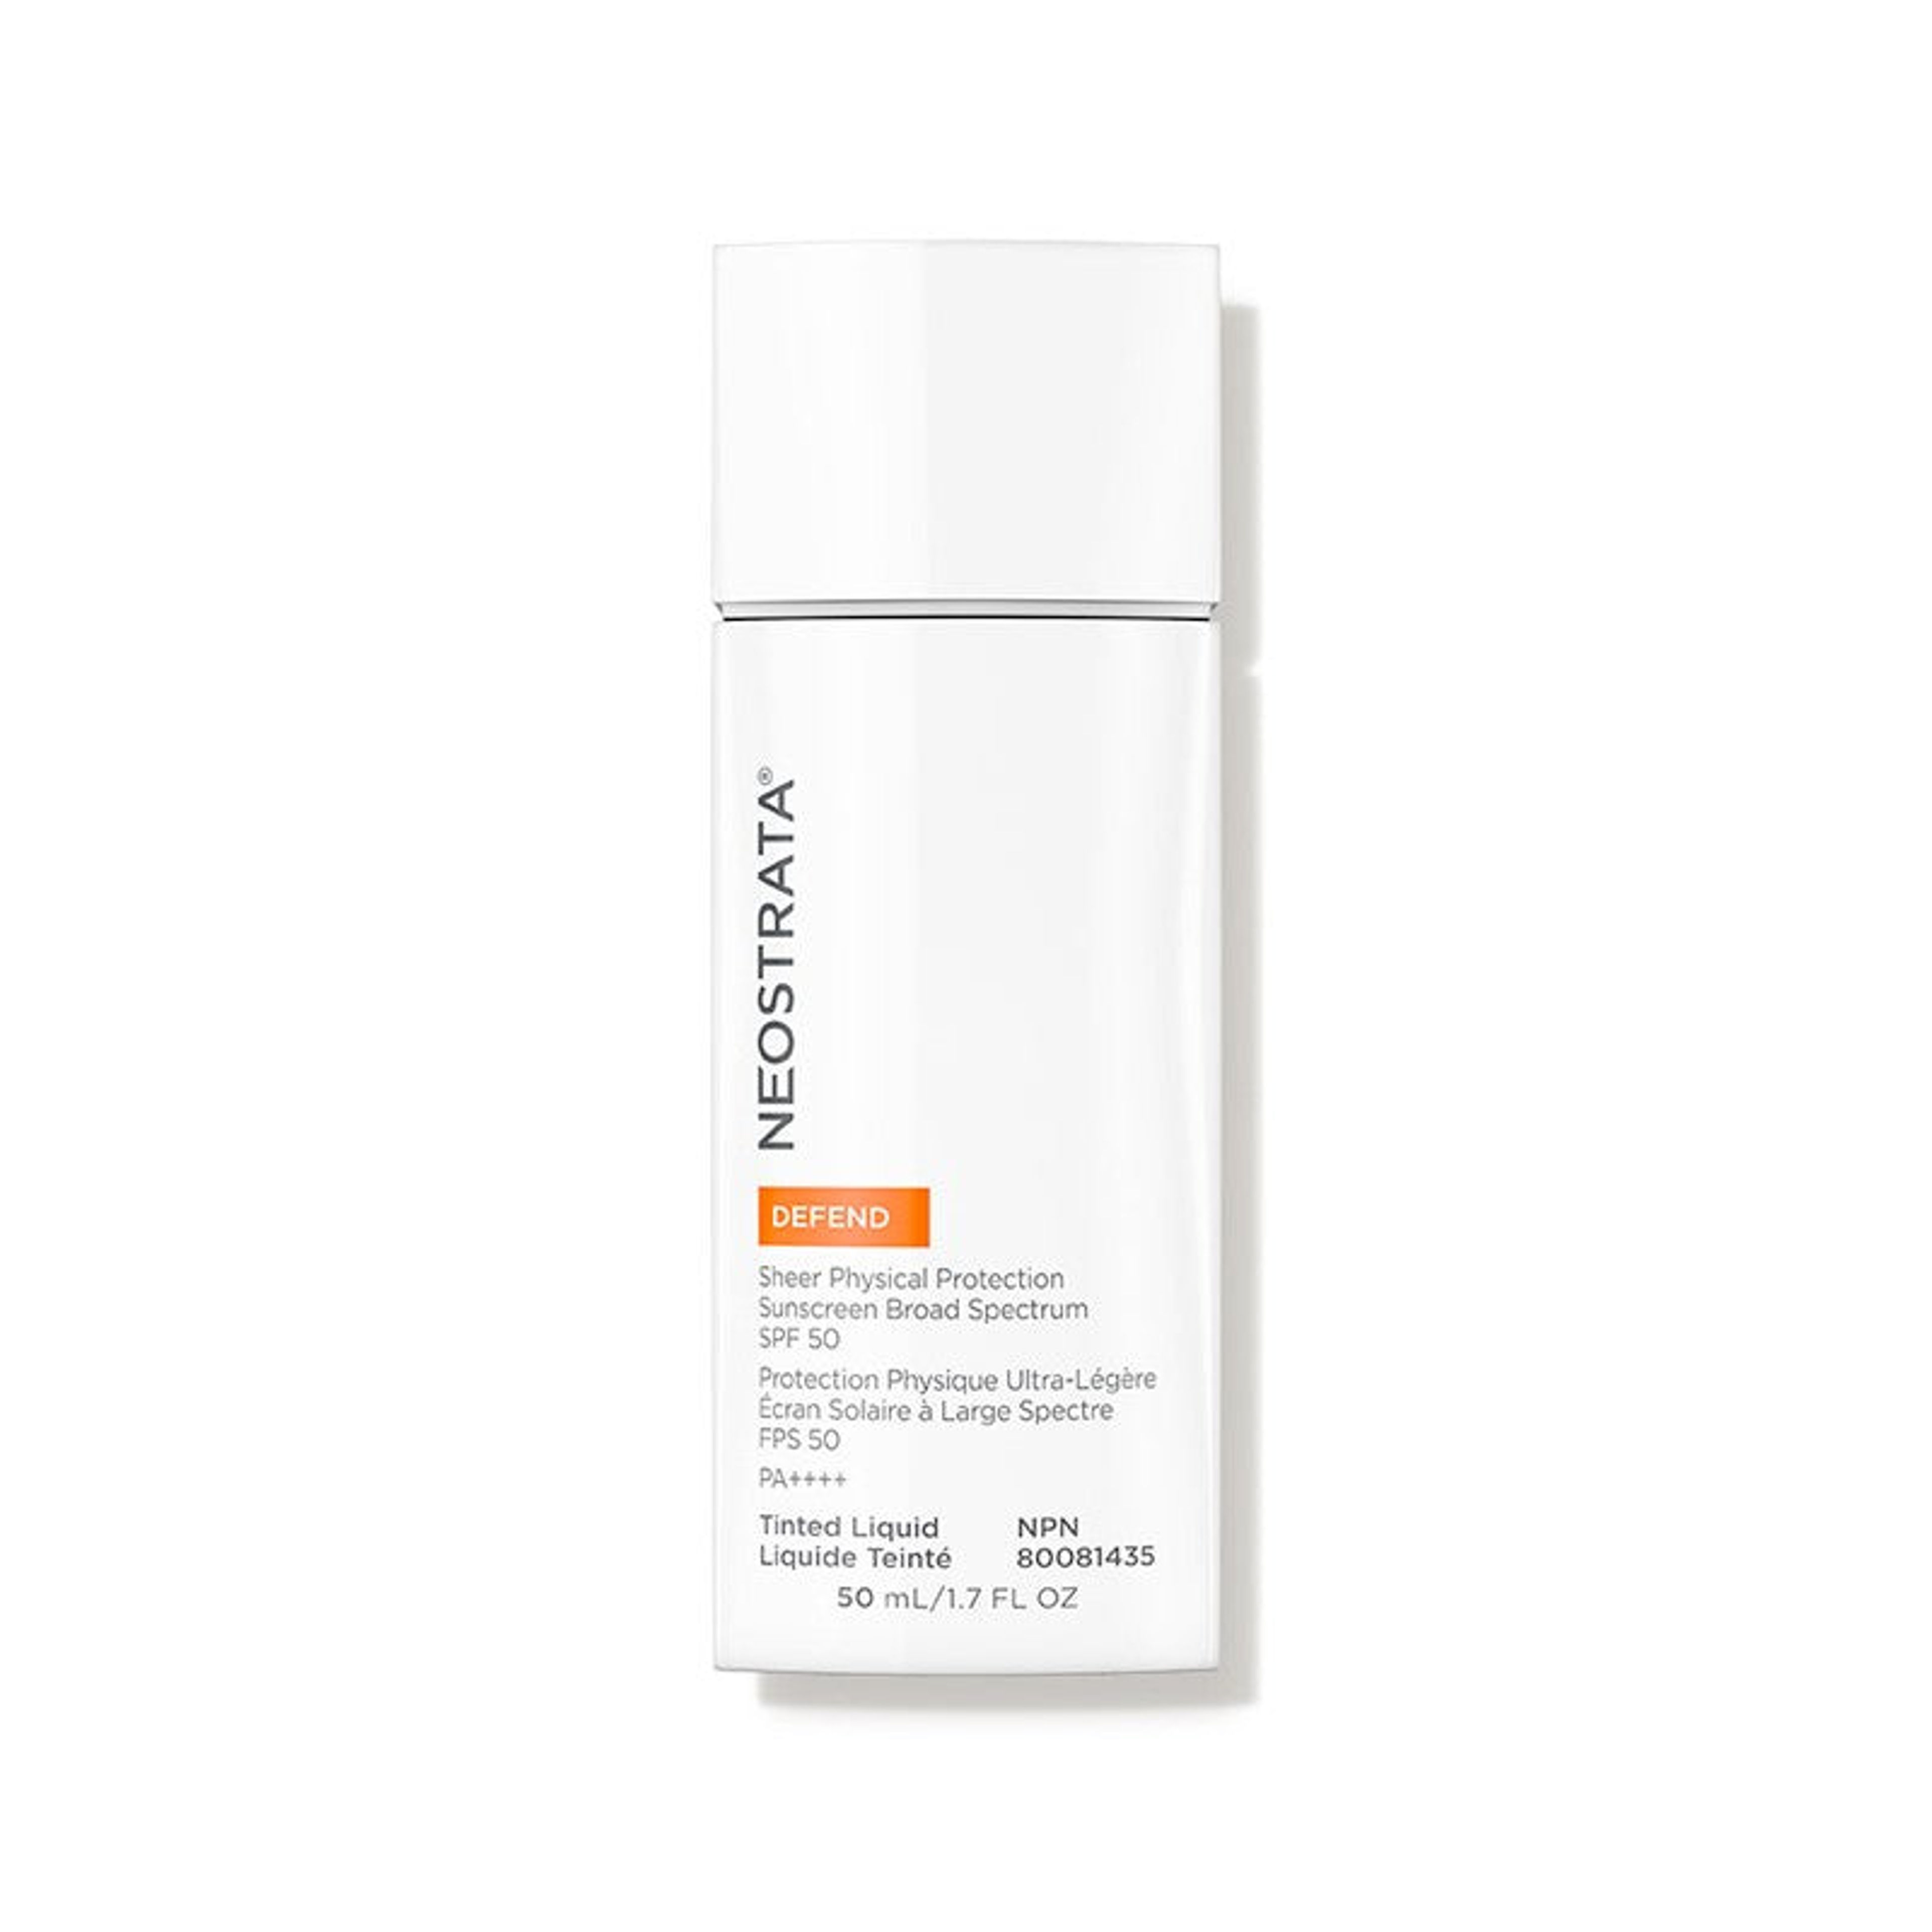 Sheer Physical Protection SPF50 image 1 expanded